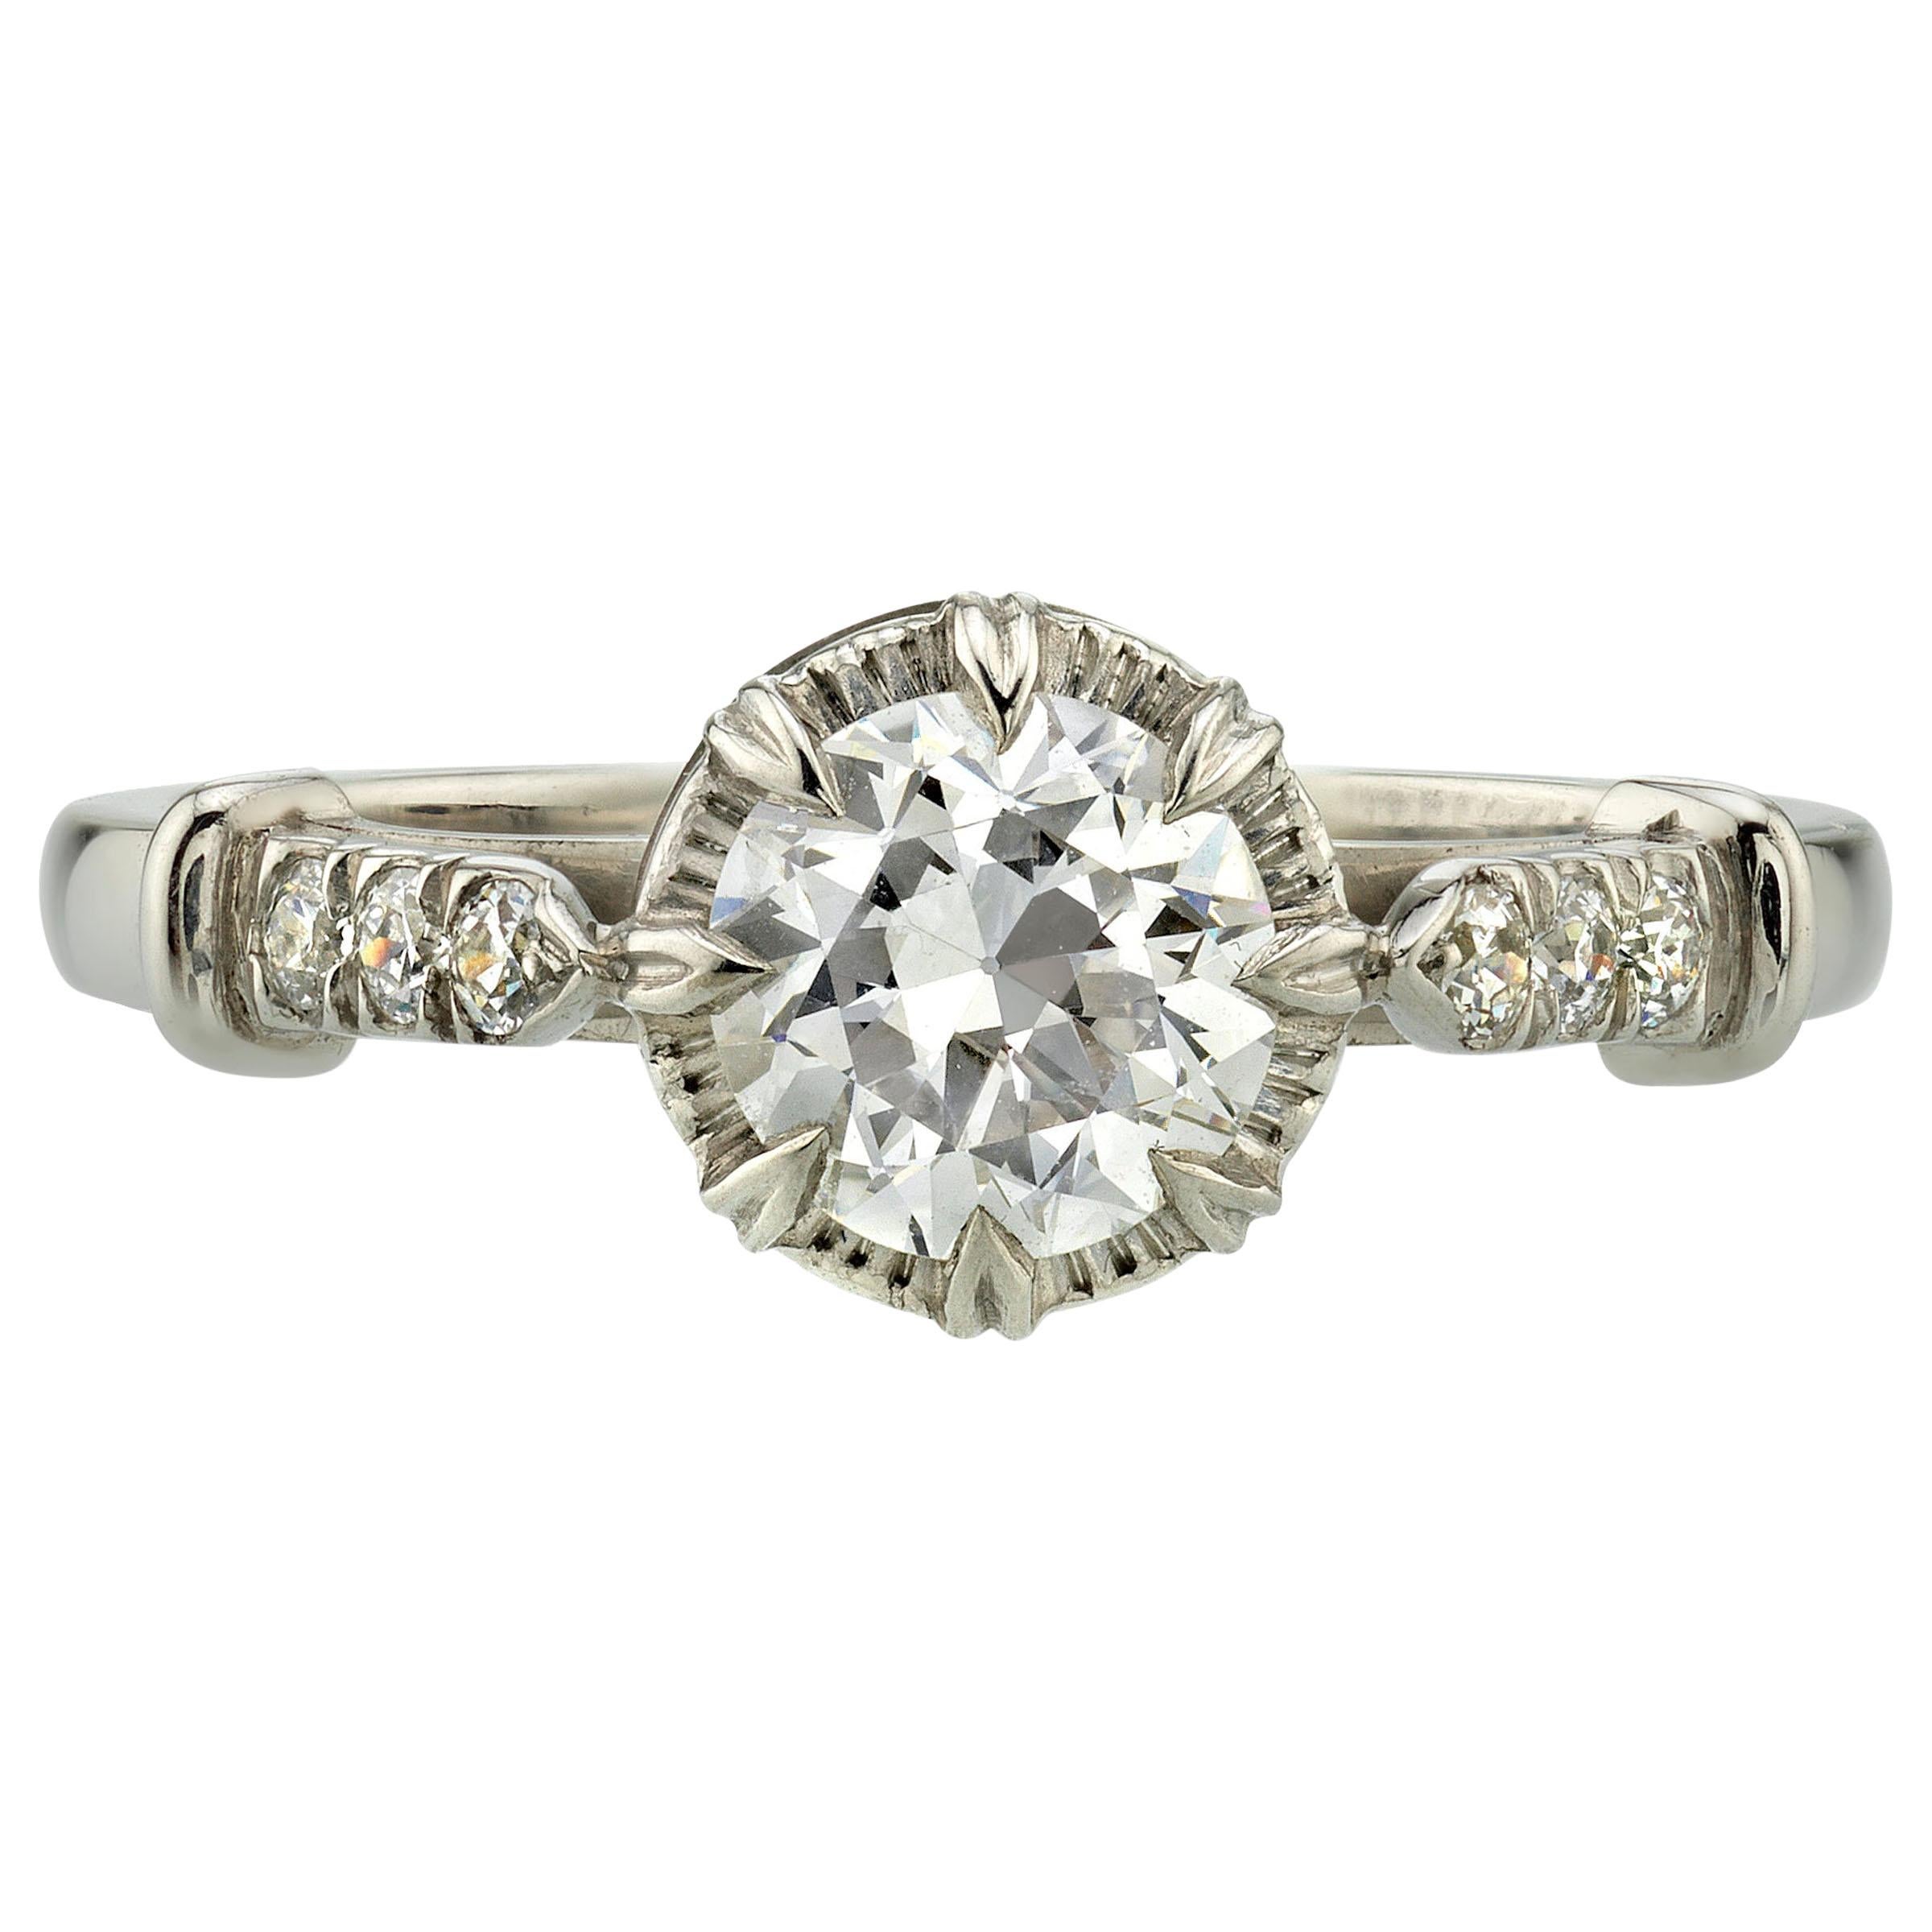 0.81 Carat Old European Cut Diamond Set in a Handcrafted Platinum Ring